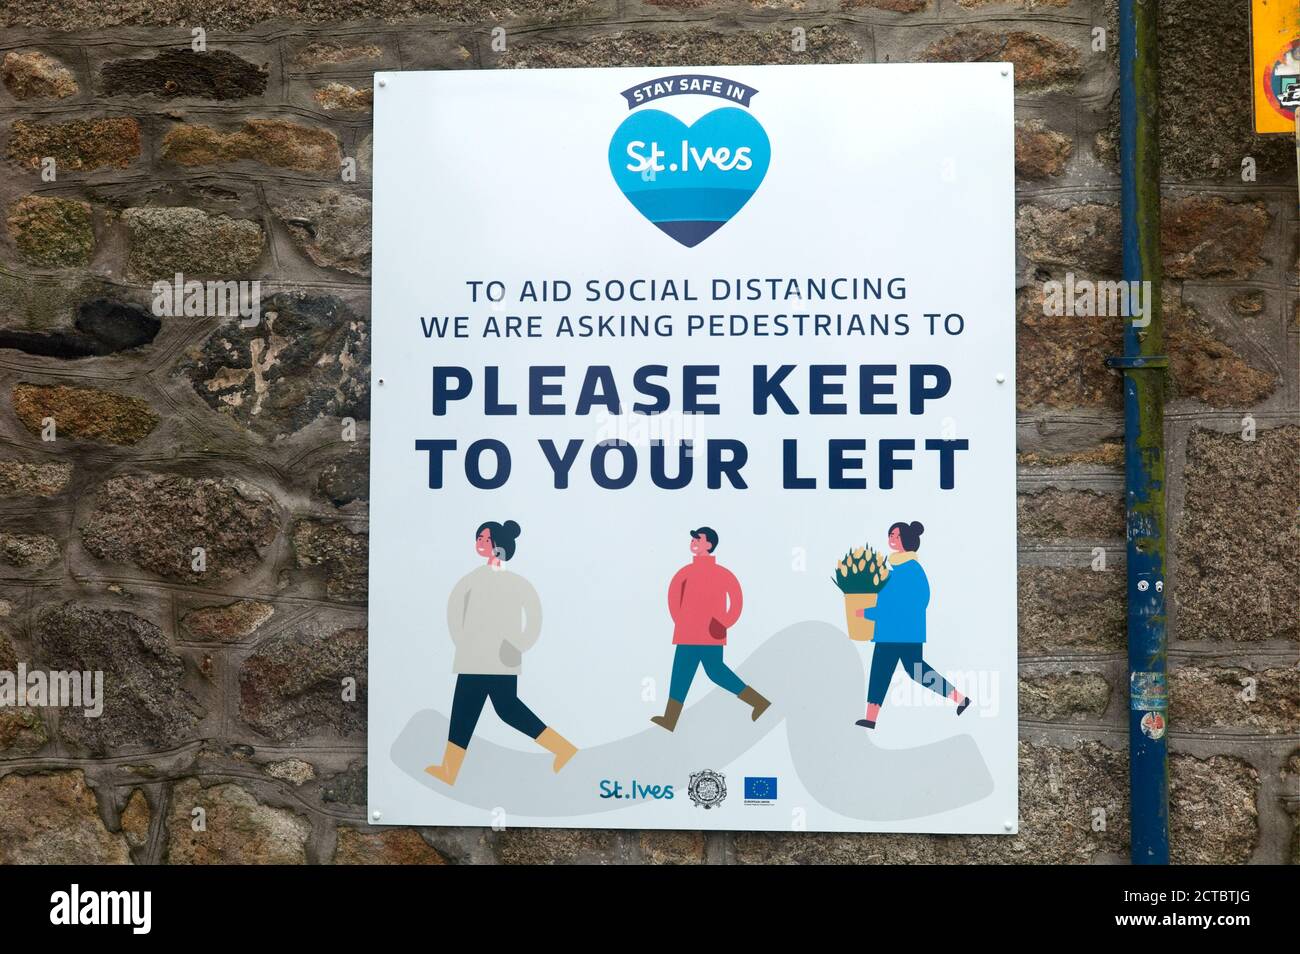 Sign in St Ives, Cornwall, England, to help social distancing in the time of the COVID-19 pandemic Stock Photo